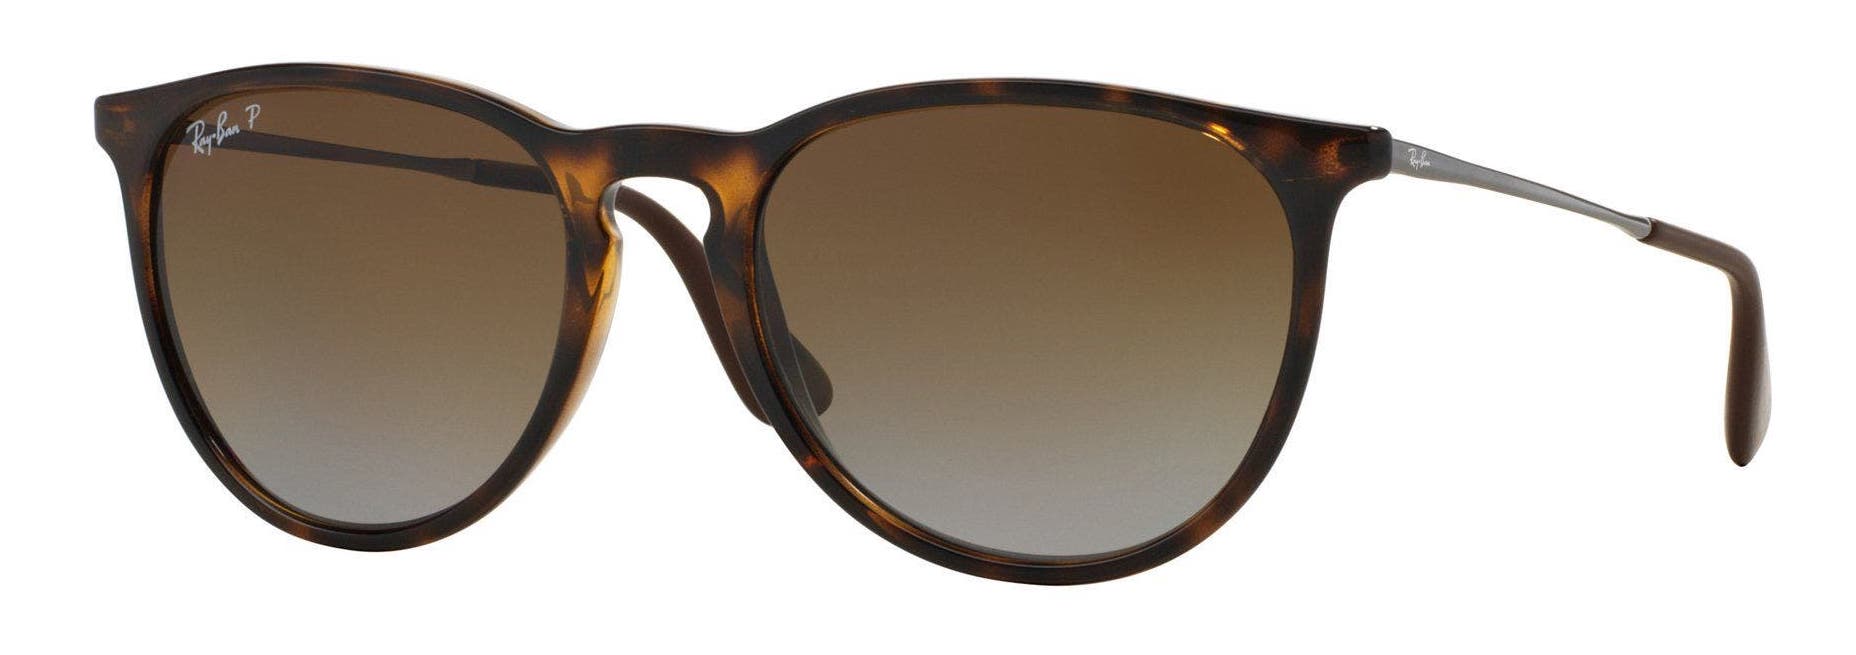 Final frame in lineup of the best women's polarized sunglasses, the Ray-Ban Erika. Havana brown frame with round polarized brown lenses.